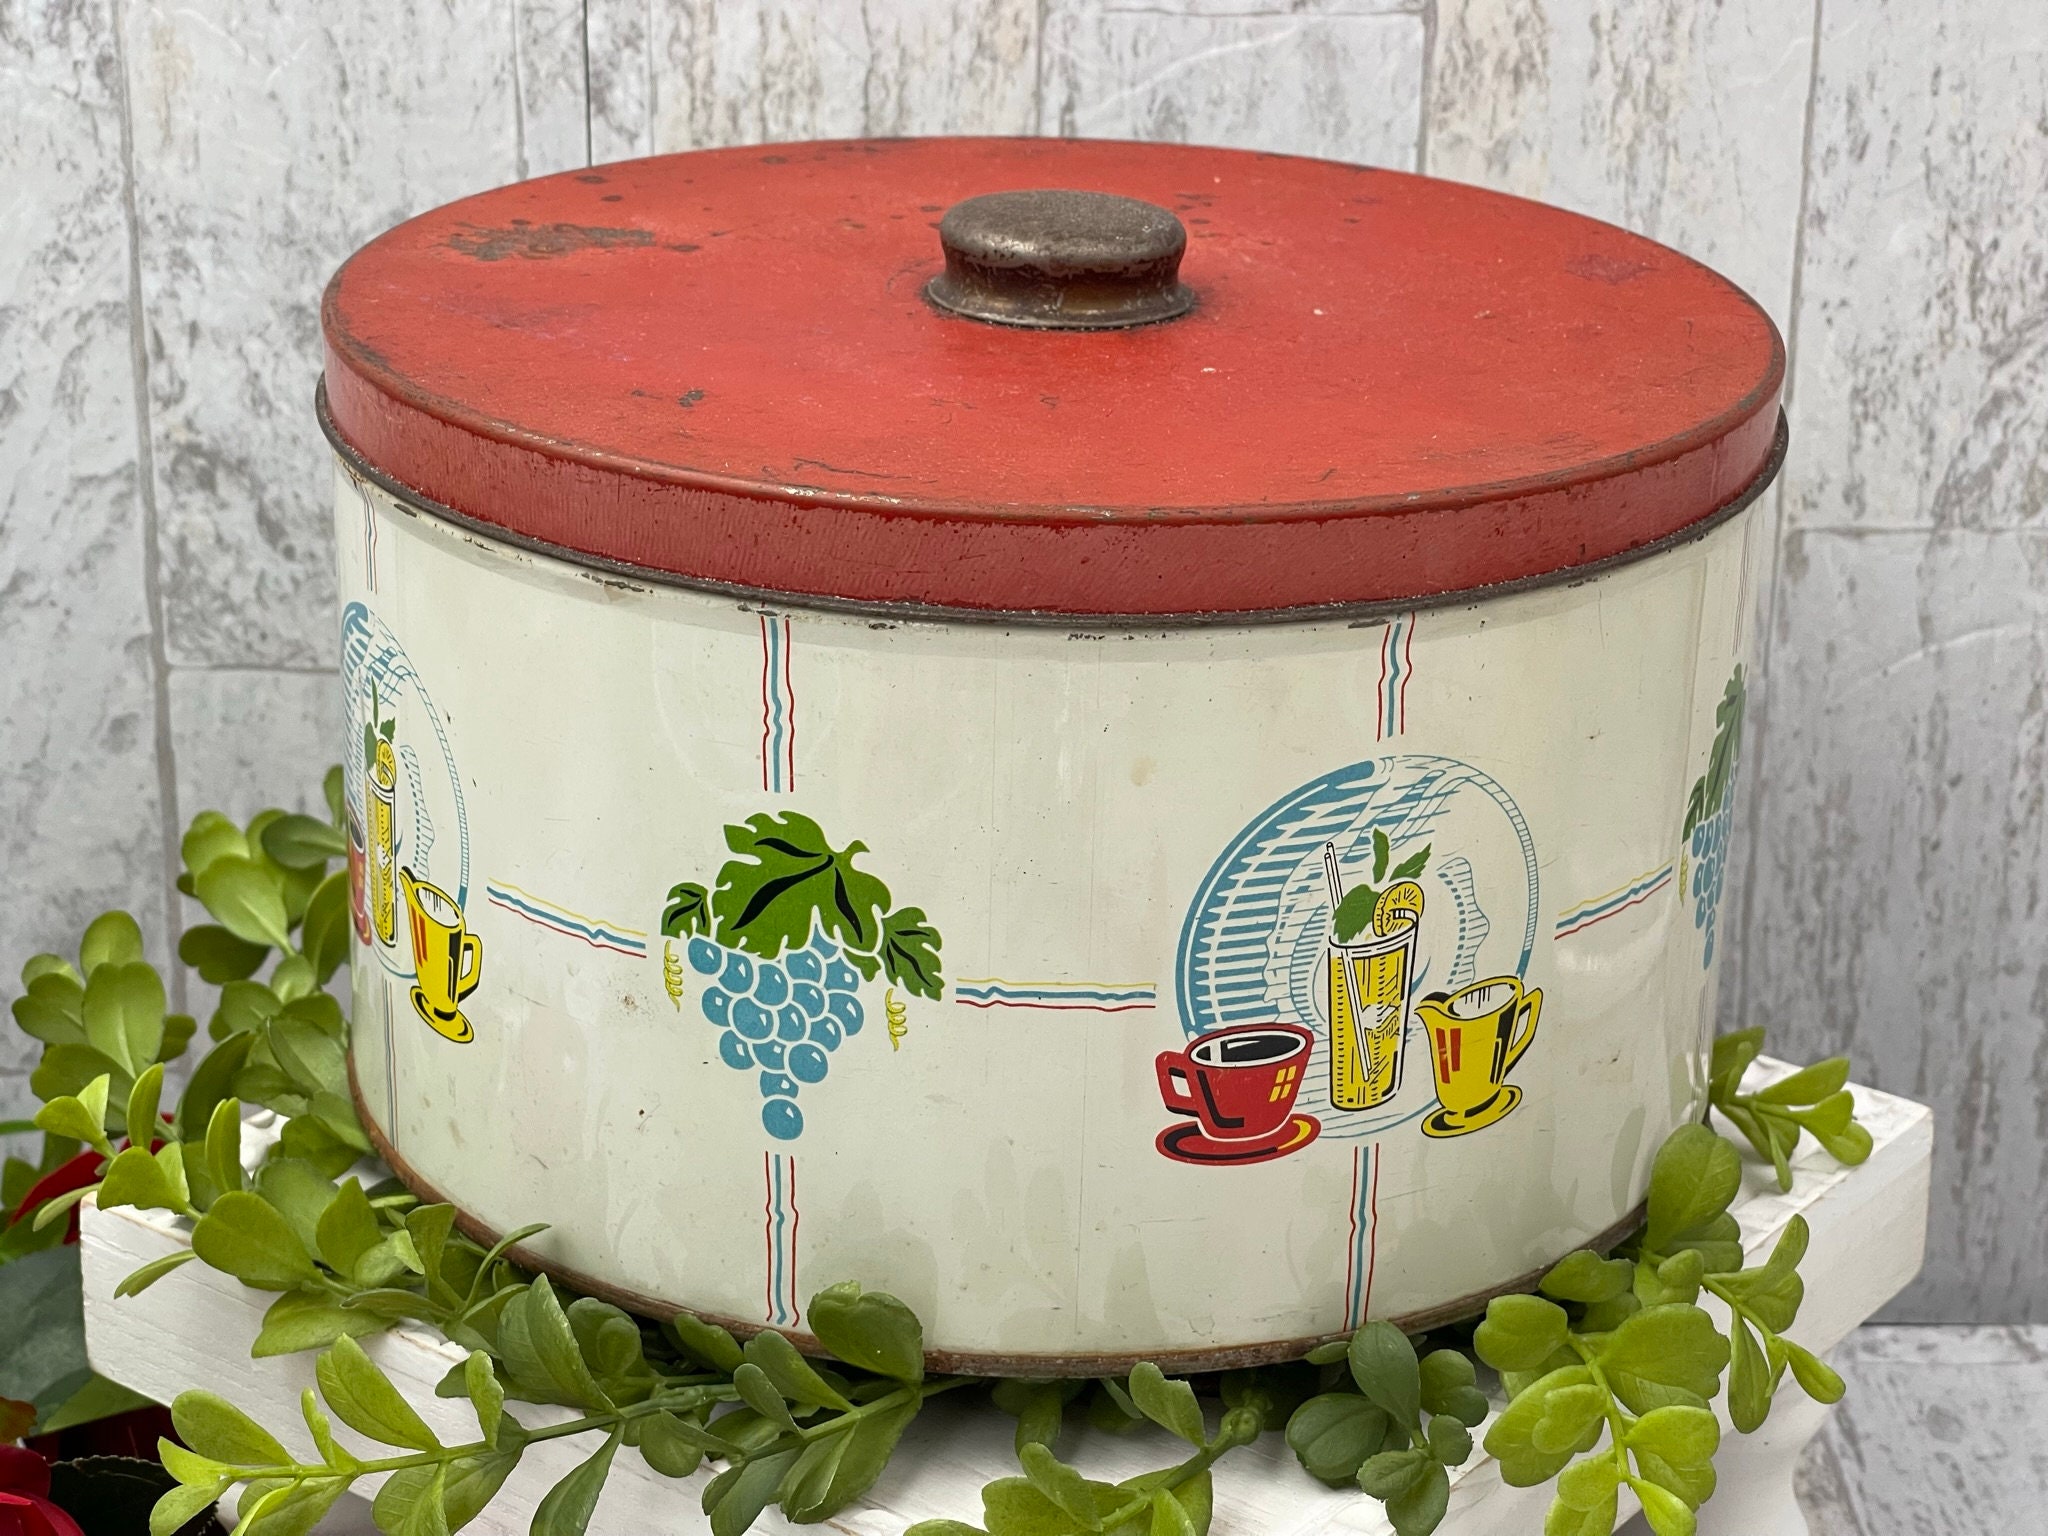 Tin boxes cans decorative storage display